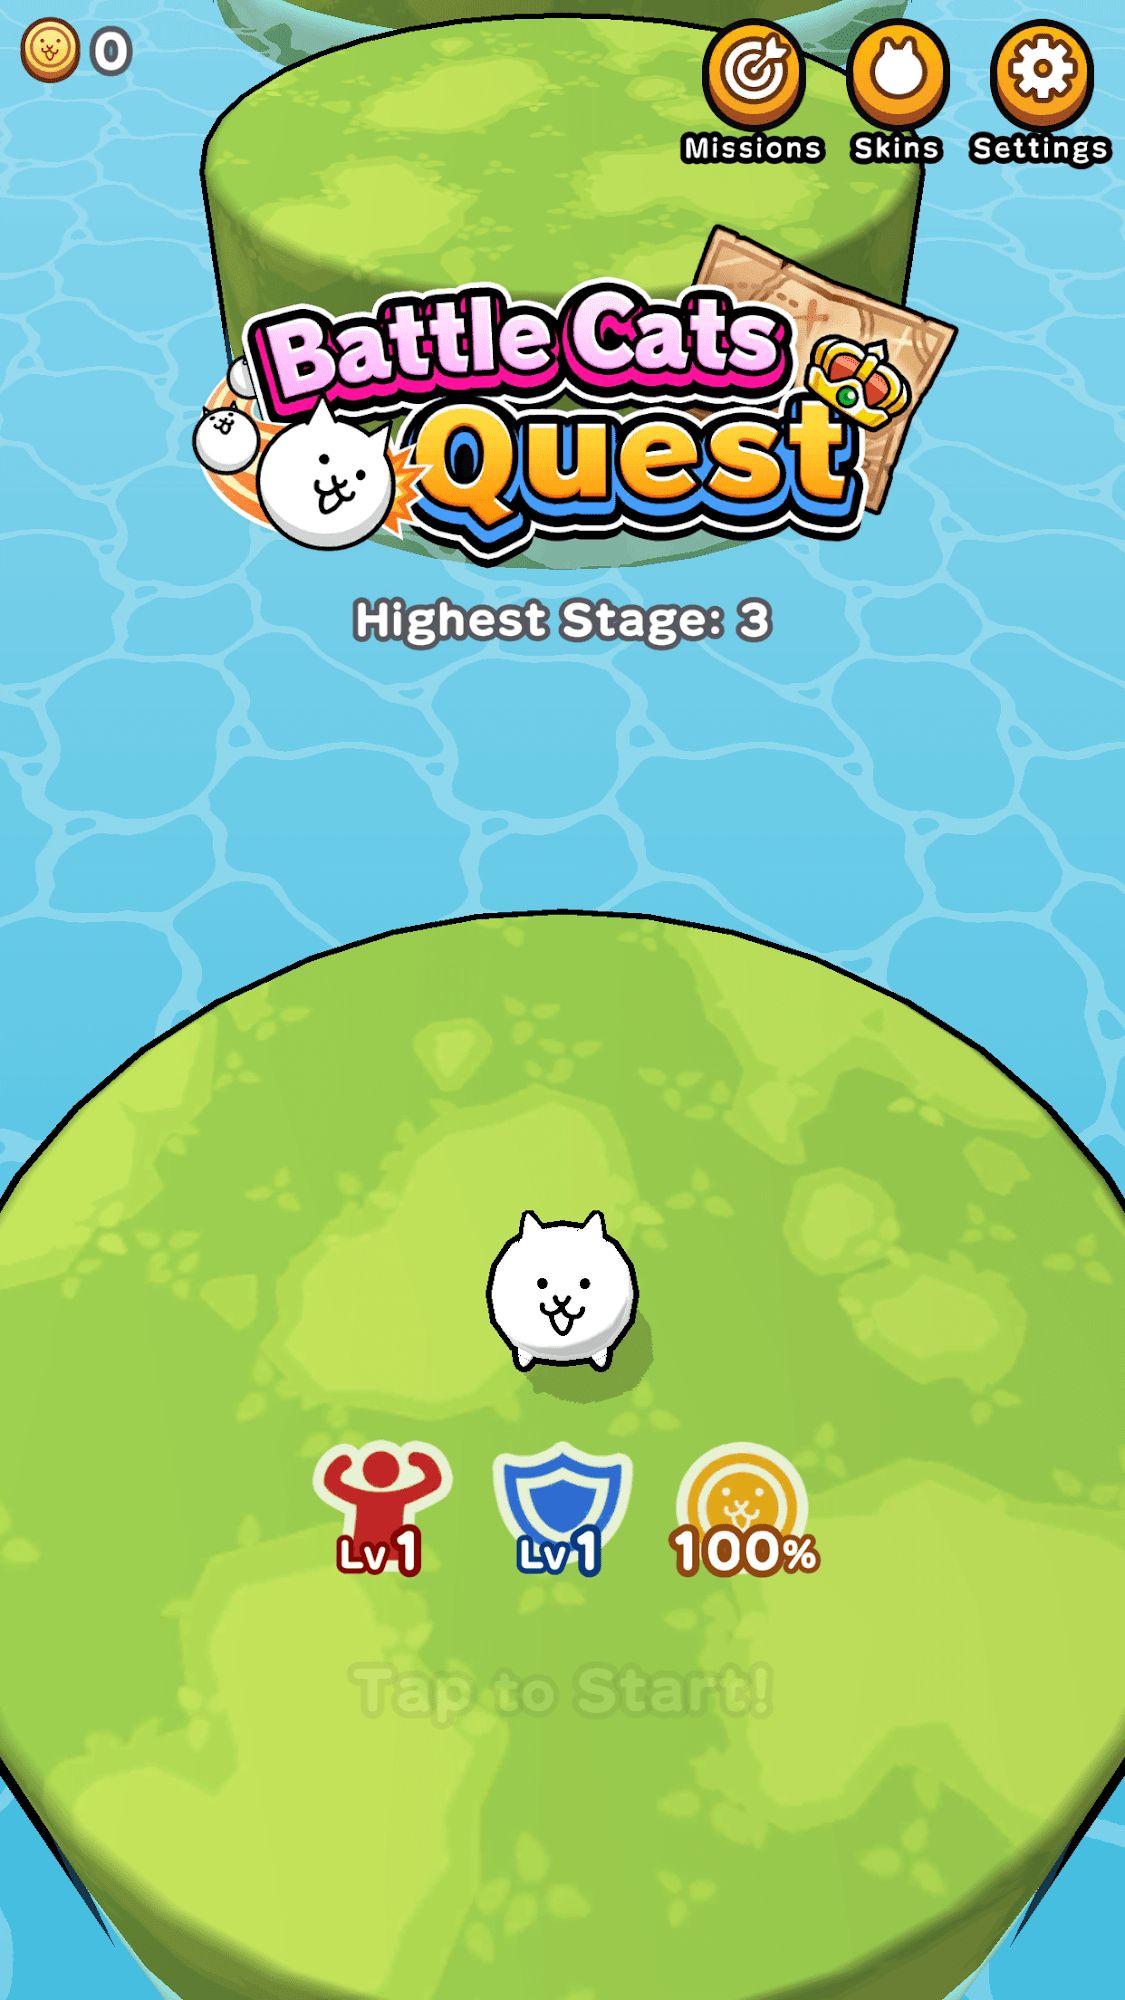 Full version of Android Easy game apk Battle Cats Quest for tablet and phone.